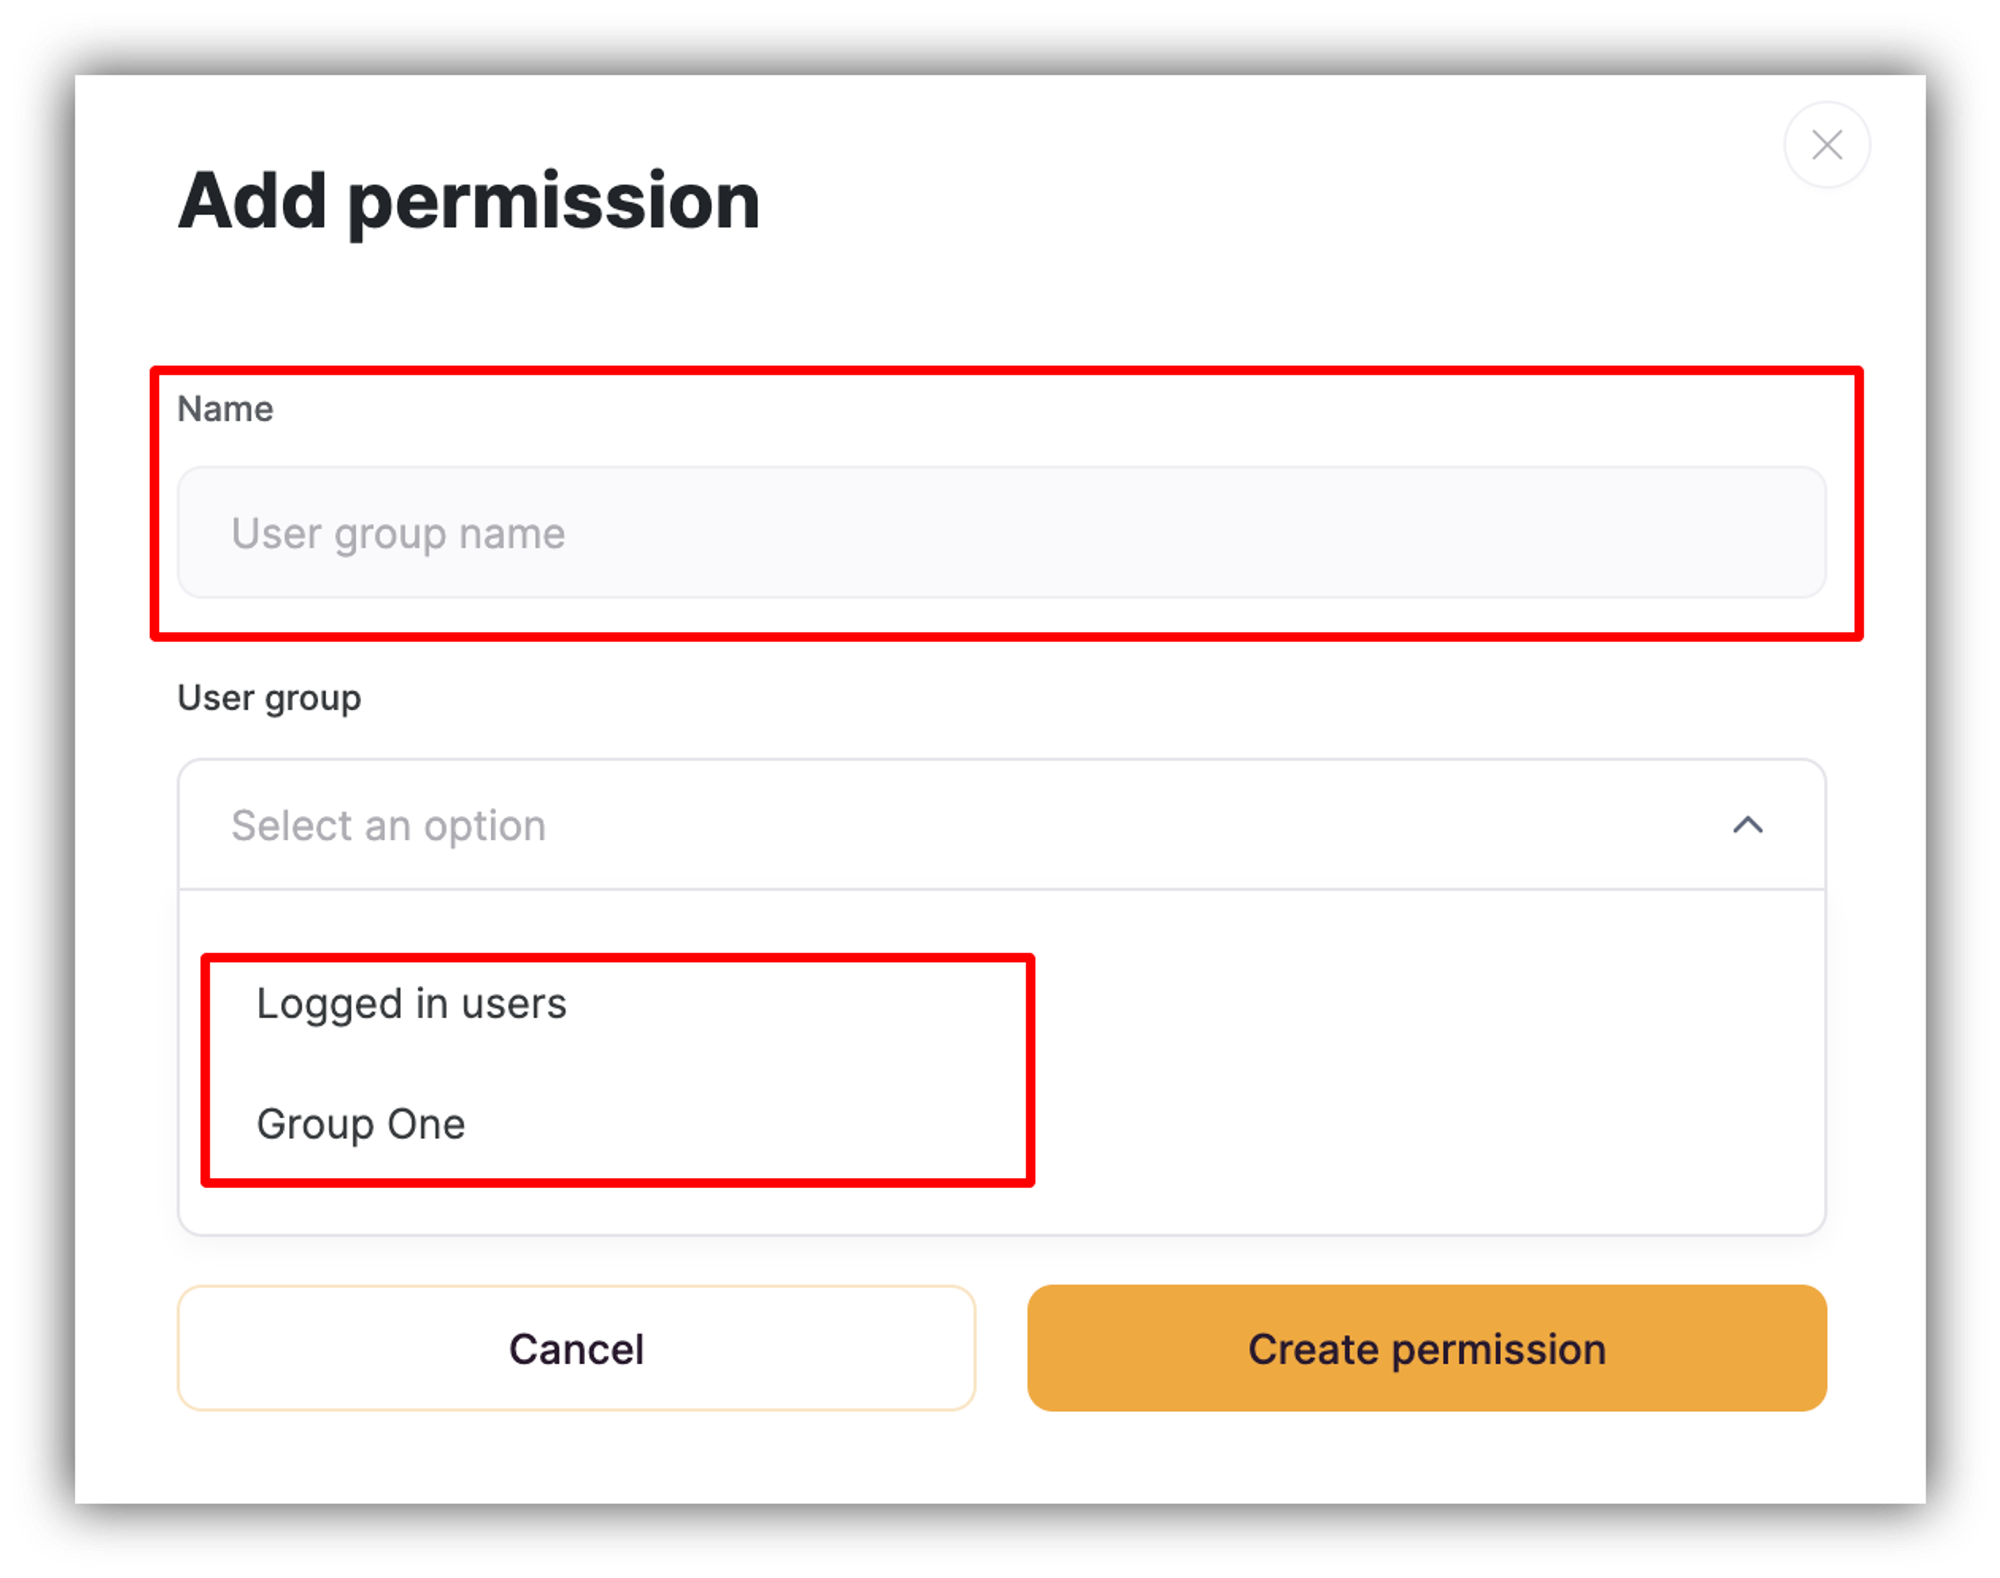 Configuring the permission rule